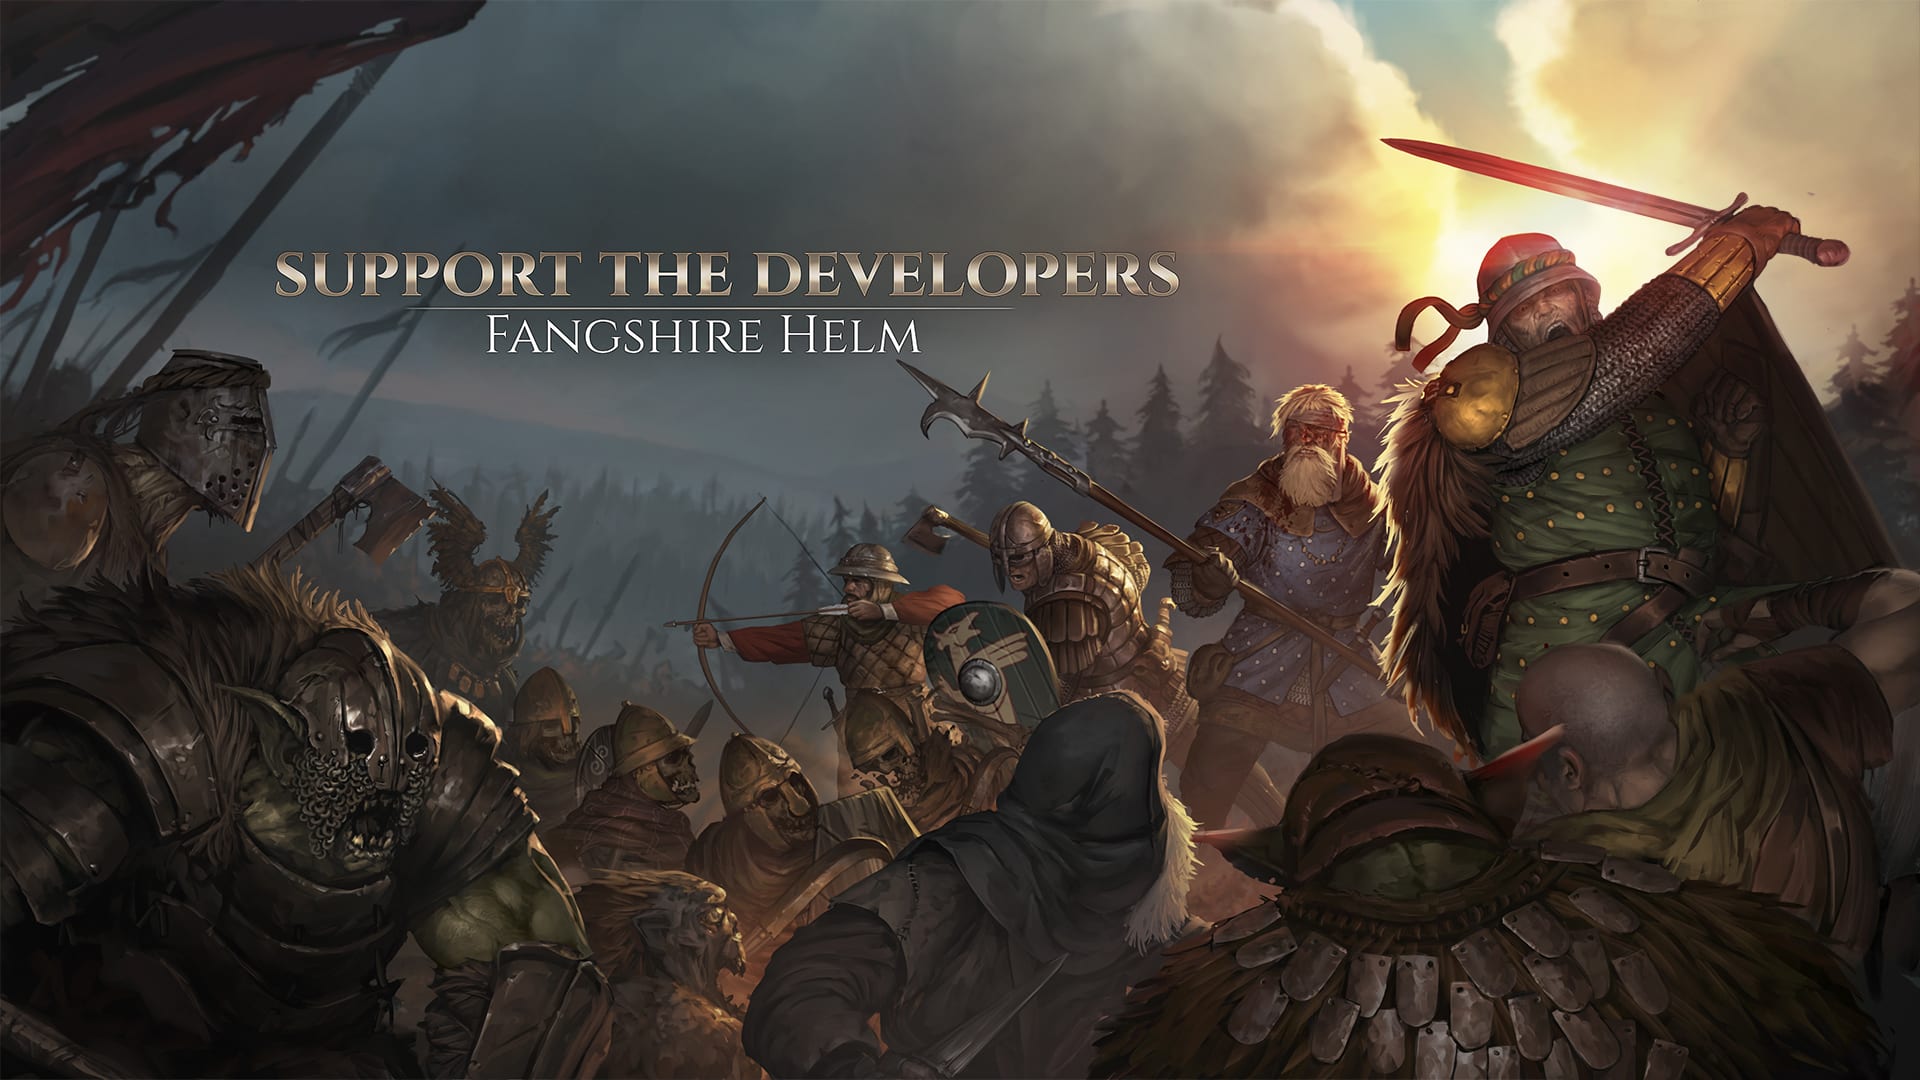 Support the Developers - Fangshire Helm